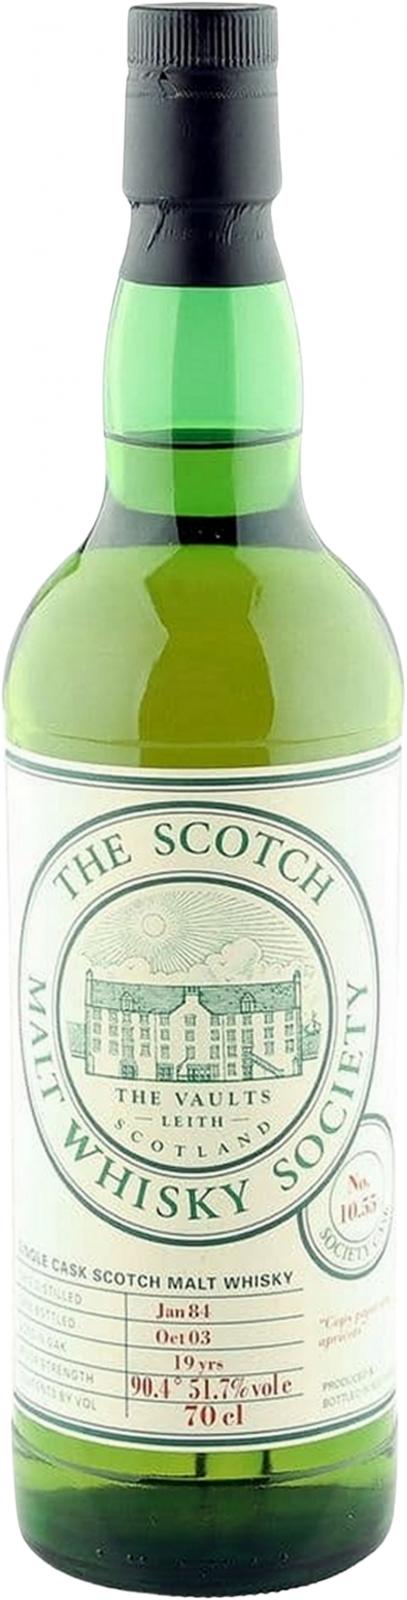 Bunnahabhain 1984 SMWS 10.55 Copy paper and apricots 51.7% 700ml